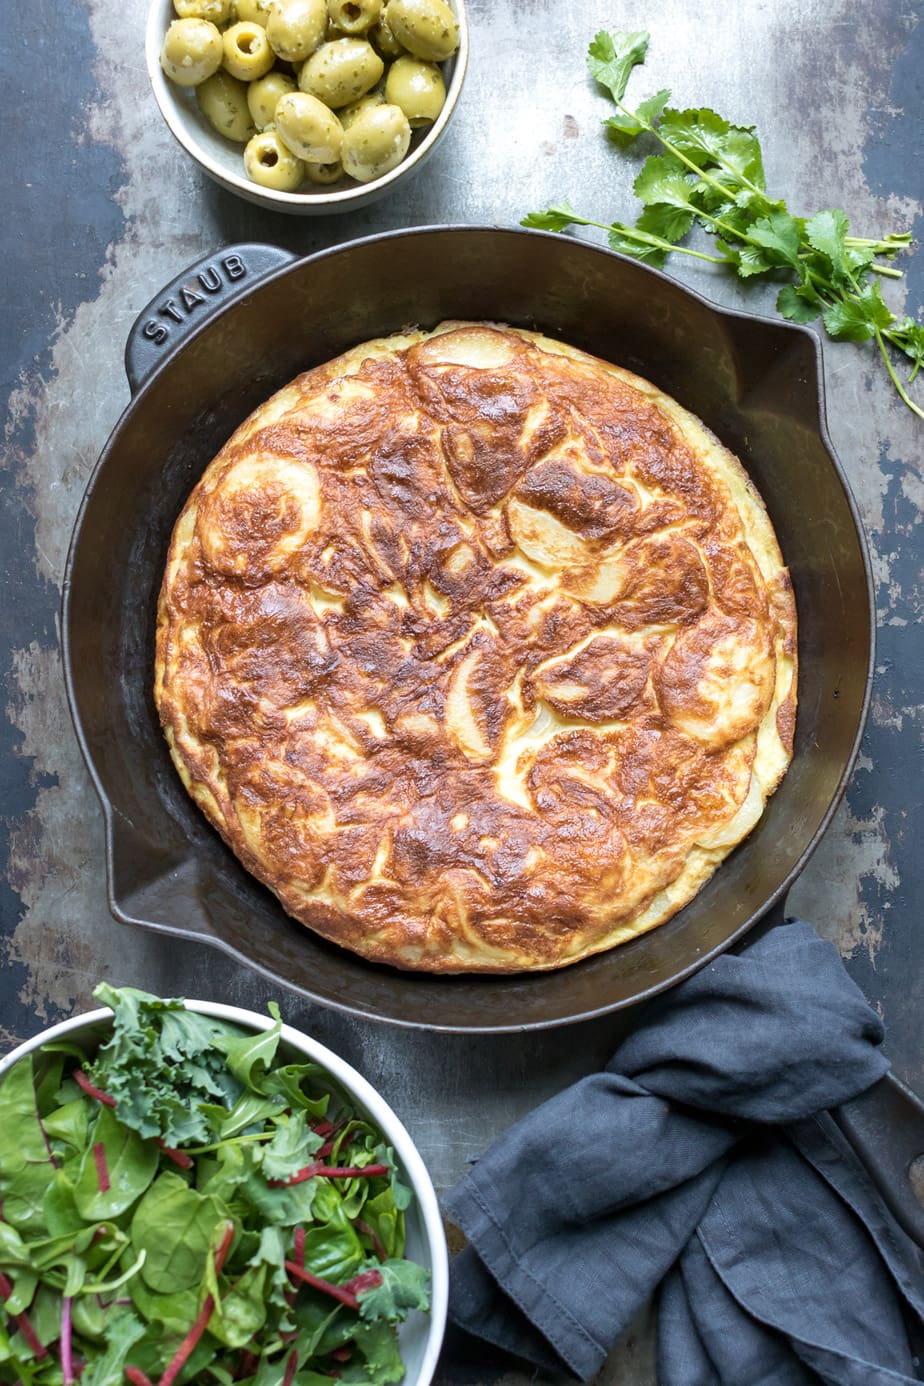 Skillet with potato omelette.